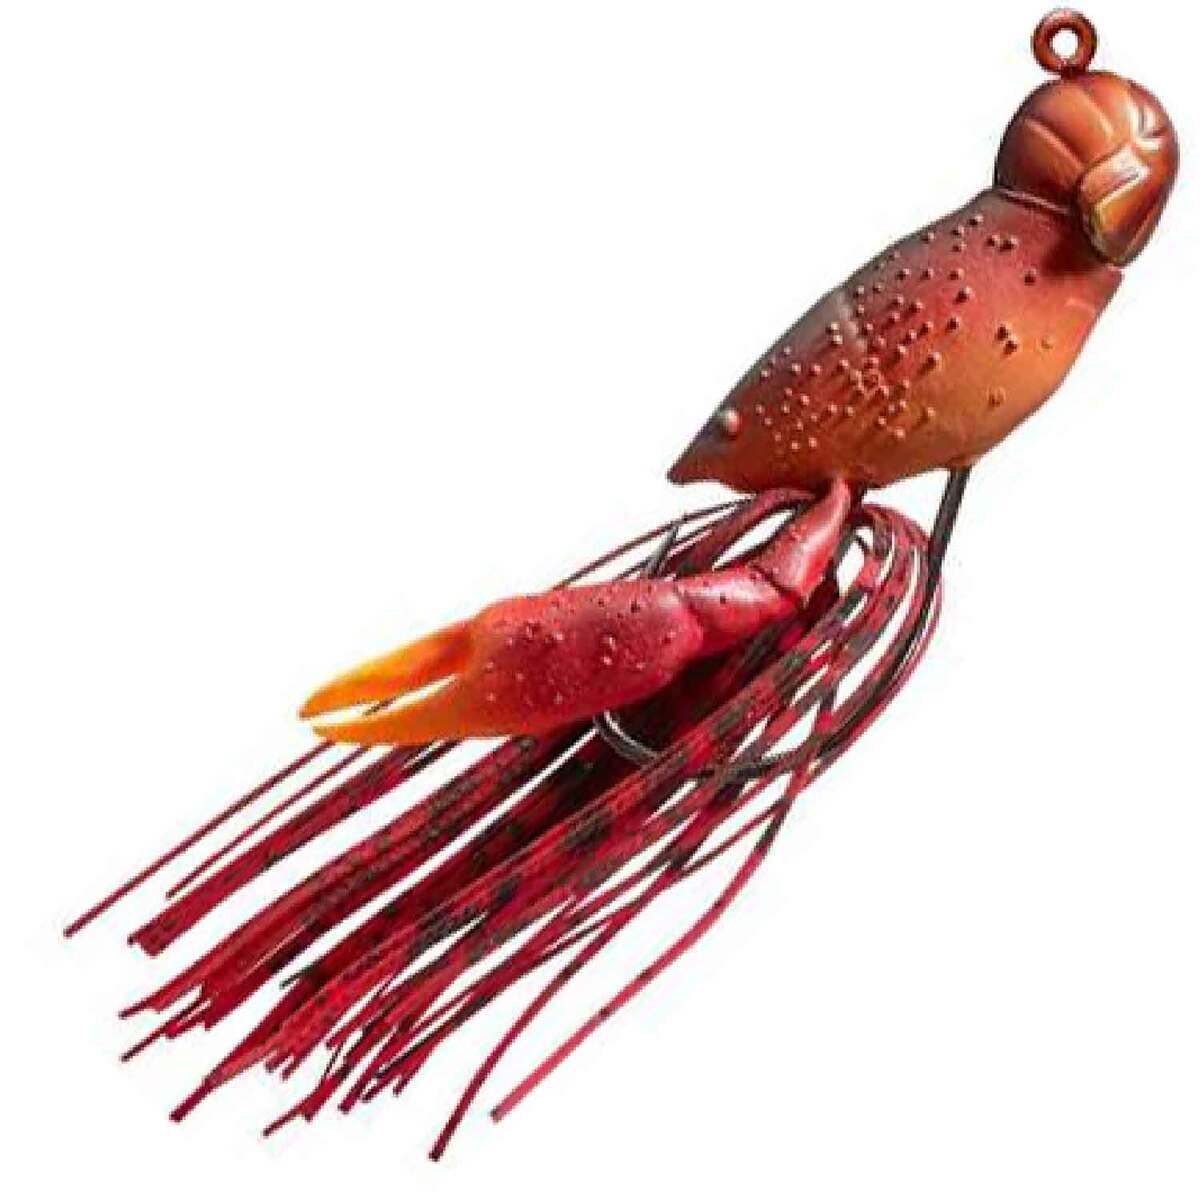 LIVETARGET Hollow Body Craw Soft Craw Bait - Red, 1-3/4in, 1/2oz